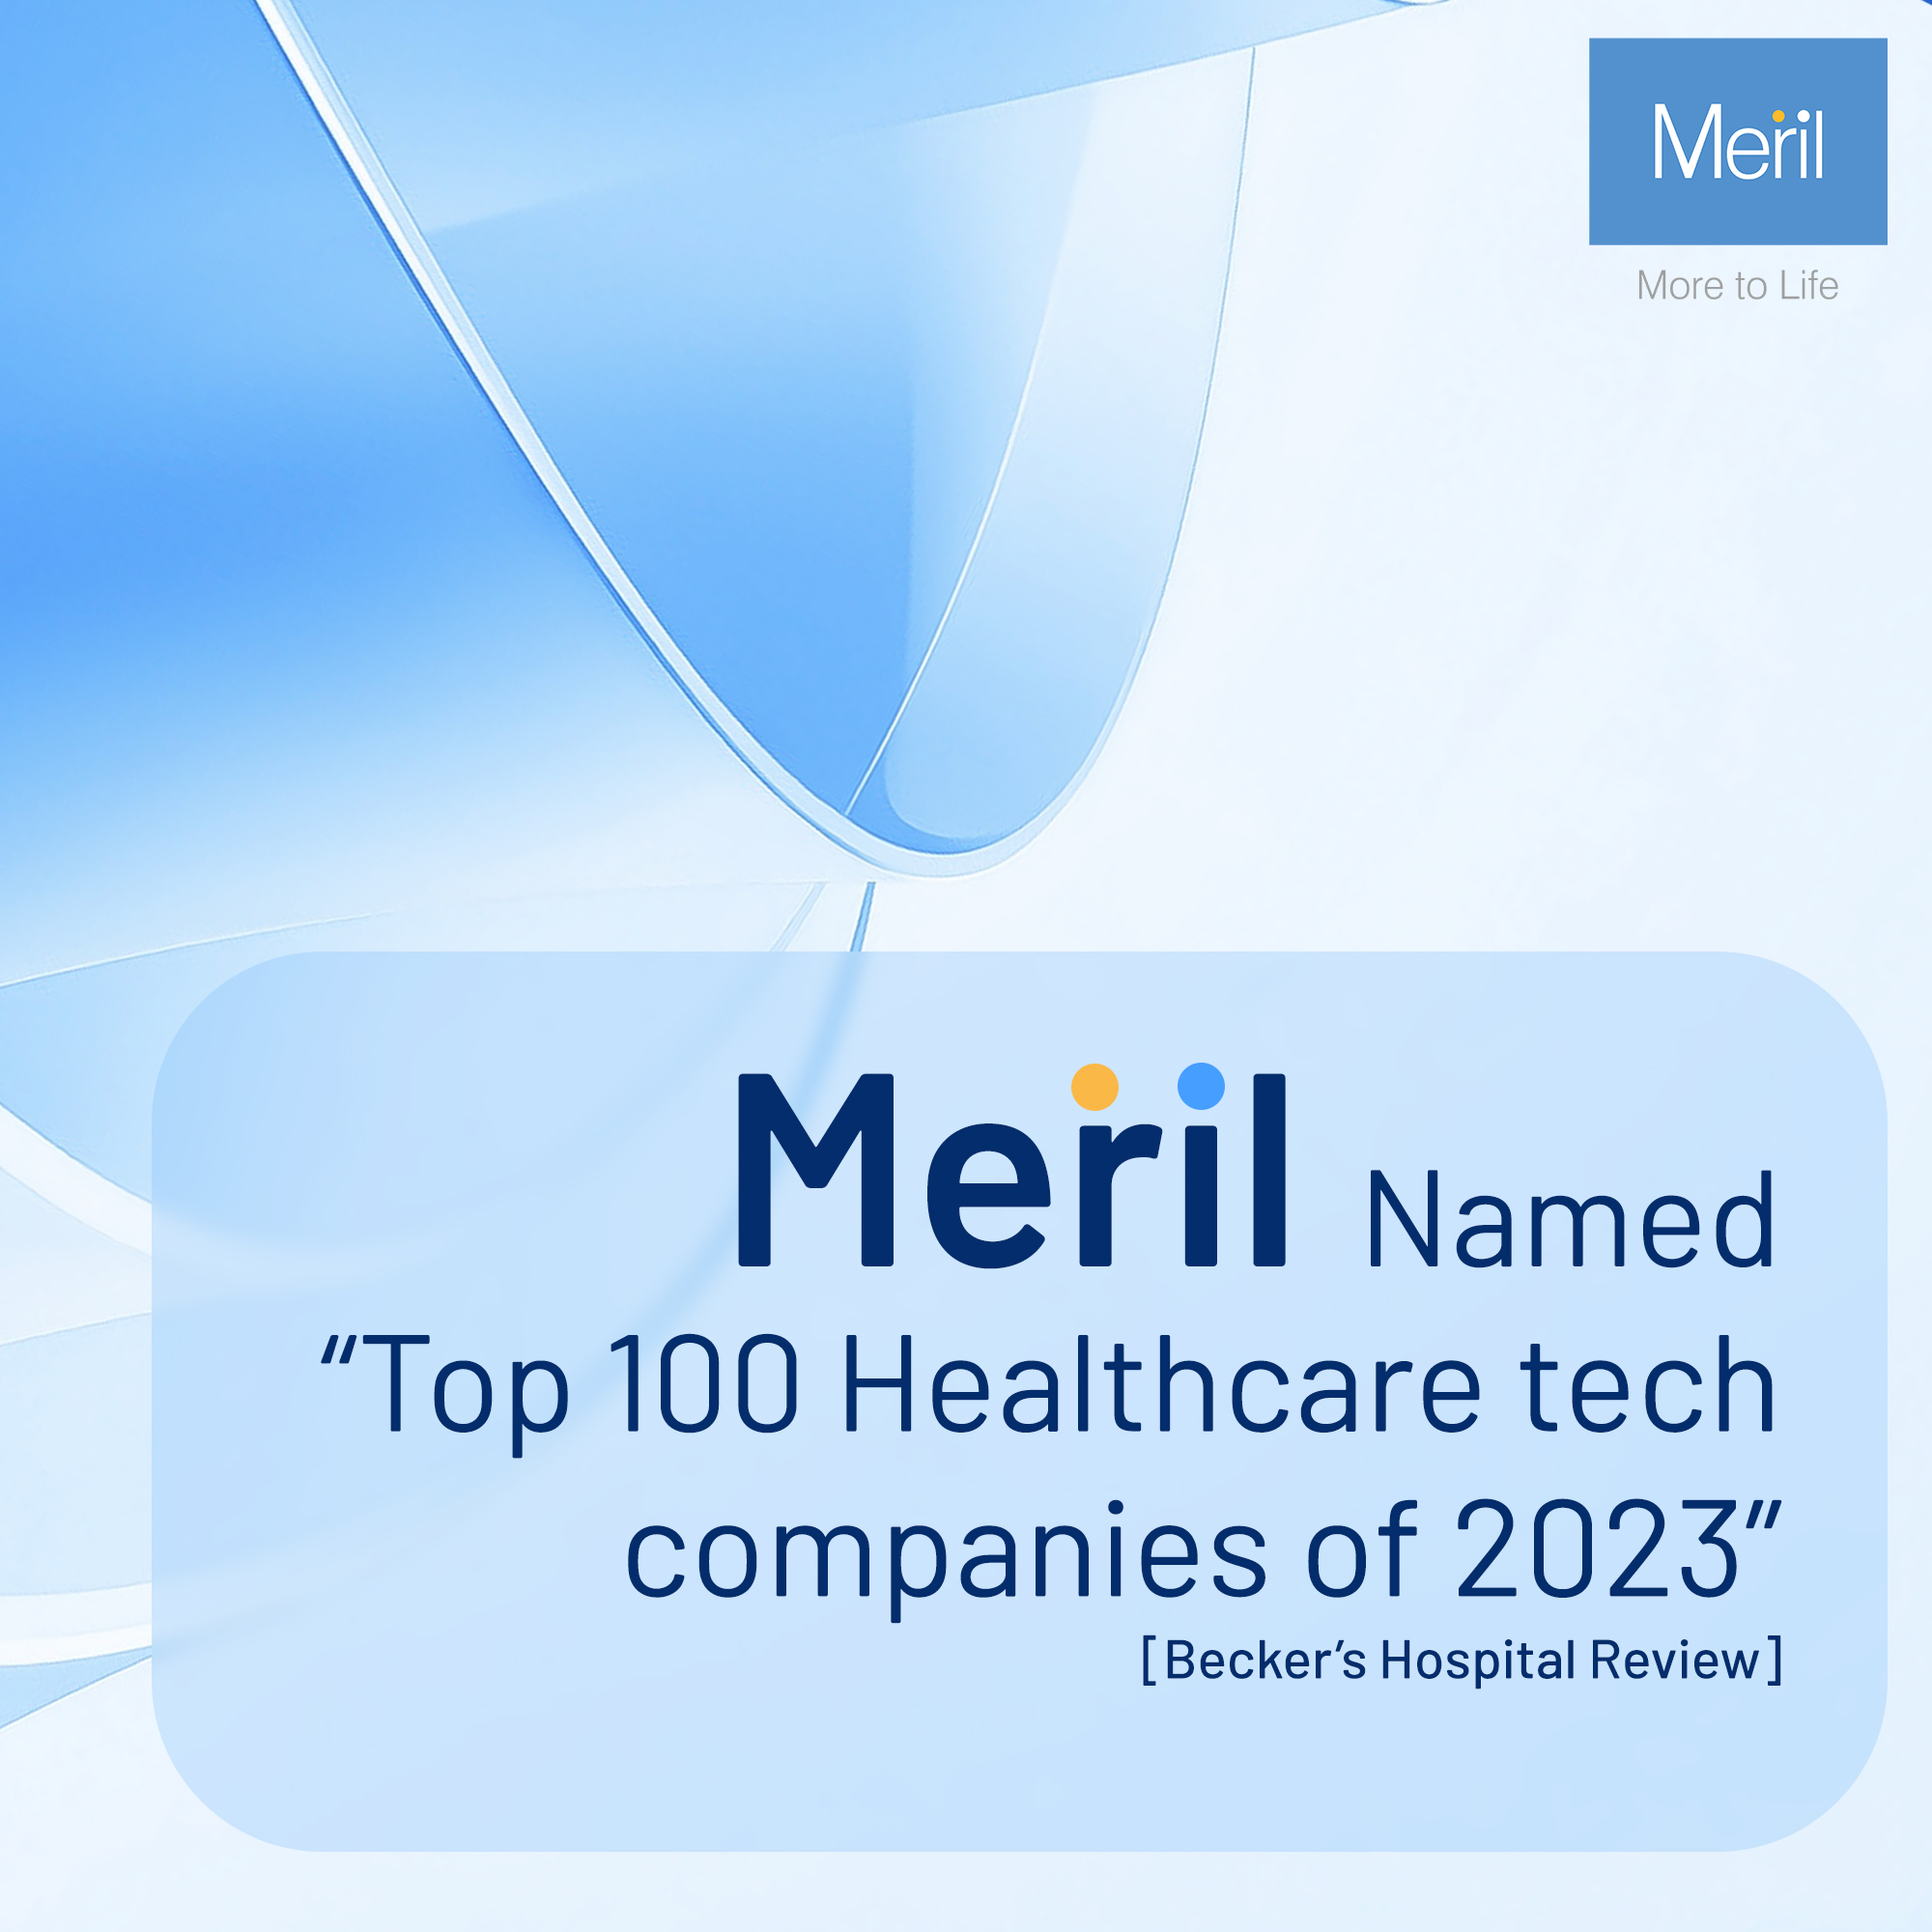 Meril is proud to be among the top 100 companies in Health Tech for 2023, as unveiled in the Healthcare Technology report by Becker's Hospital Review.